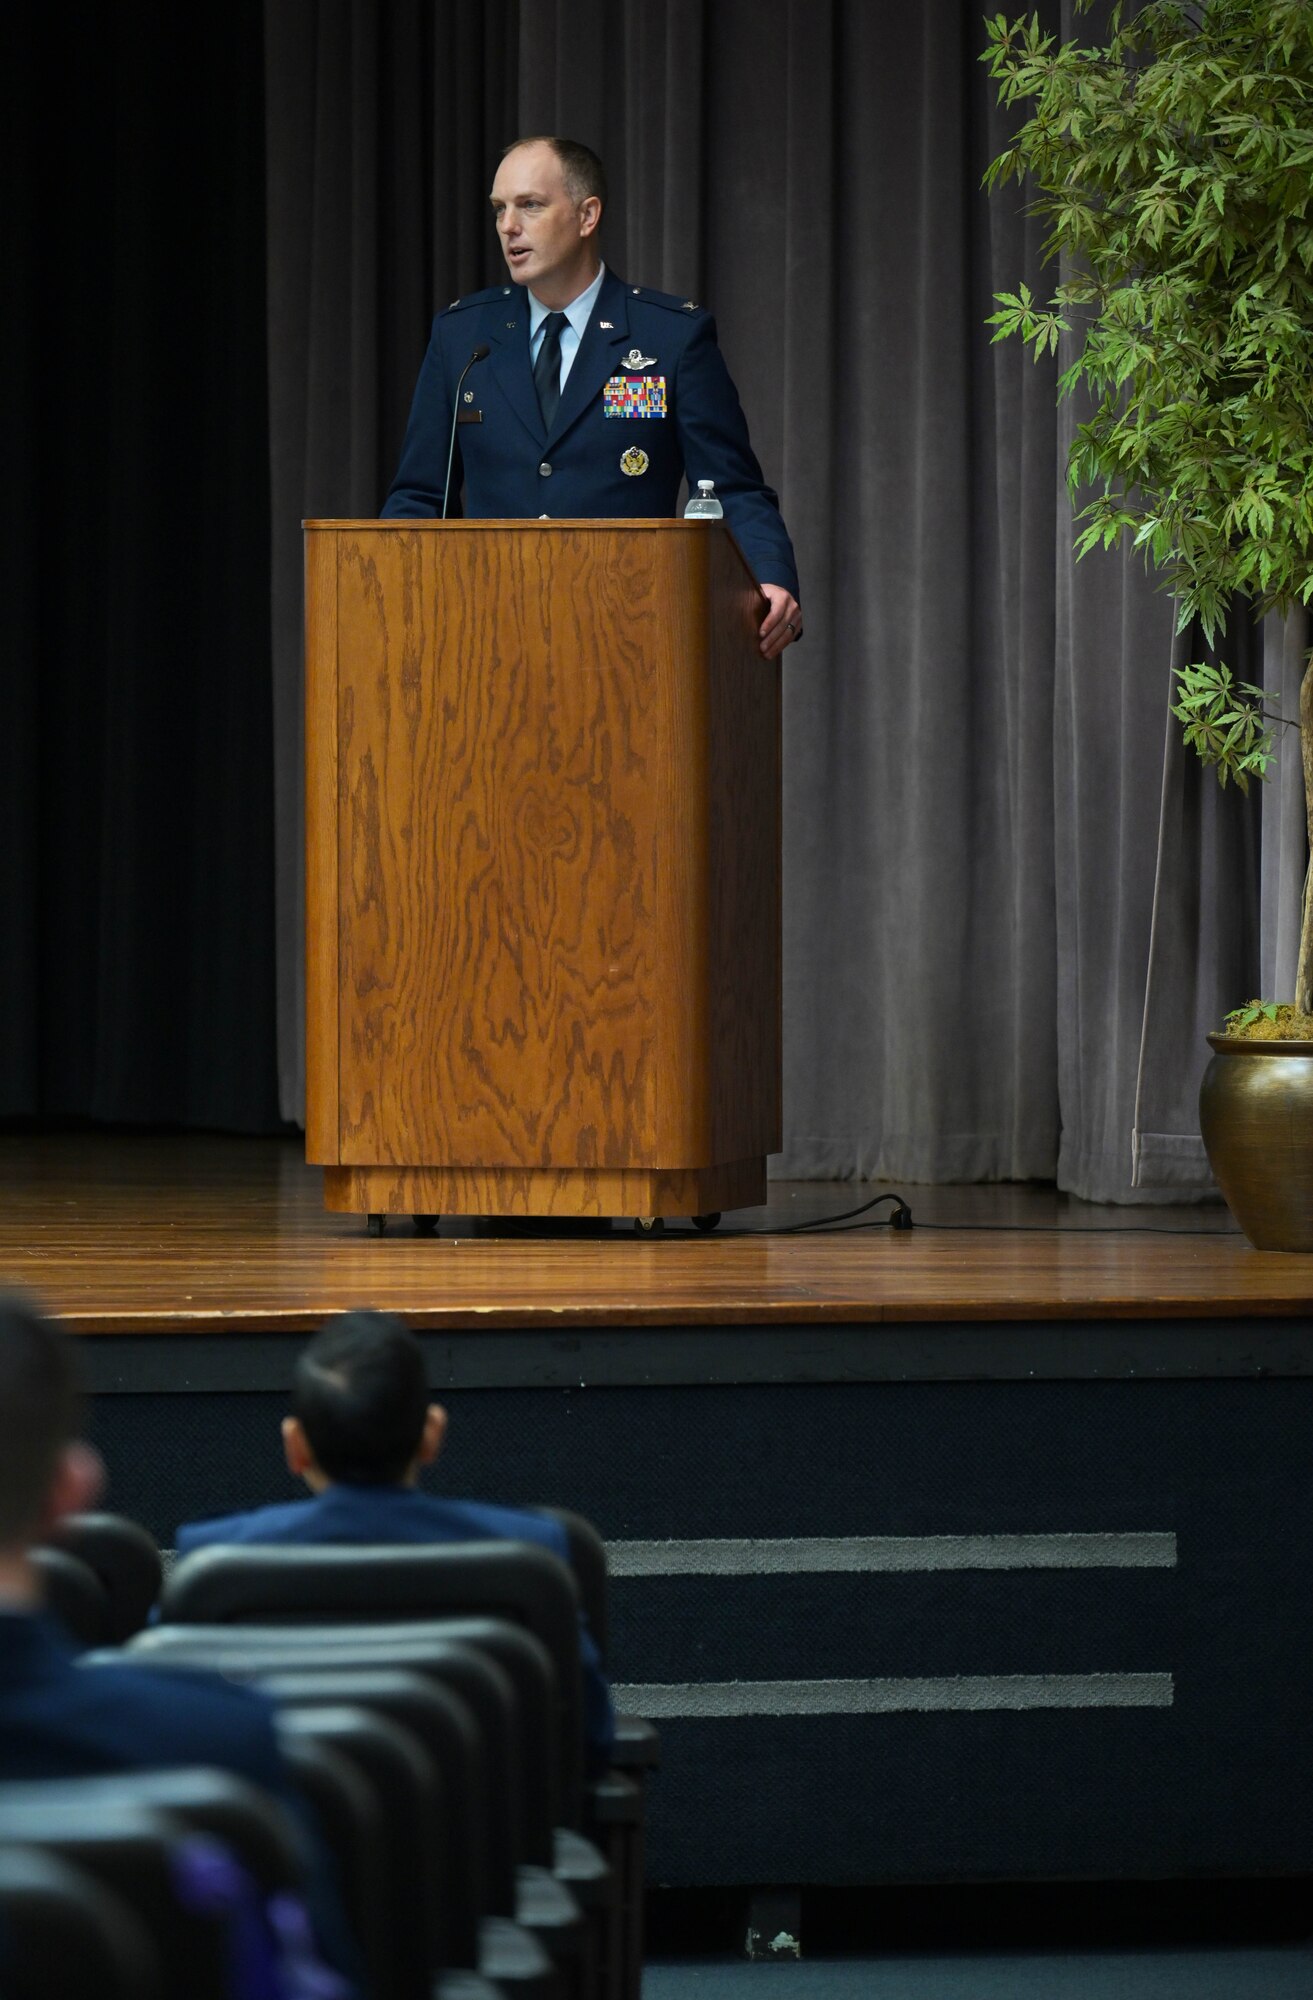 U.S. Air Force Col. Matthew Leard, 97th Air Mobility Wing commander, speaks to the Specialized Undergraduate Pilot Training class of 21-02 during their graduation ceremony Nov. 13, 2020, on Columbus Air Force Base, Miss. As commander, Leard is responsible for the formal training of all KC-46 Pegasus, C-17 Globemaster III and KC-135 Stratotanker aircrews for active duty, Air National Guard and Air Force Reserve units, as well as multiple partner air forces from across the world. (U.S. Air Force photo by Senior Airman Jake Jacobsen)